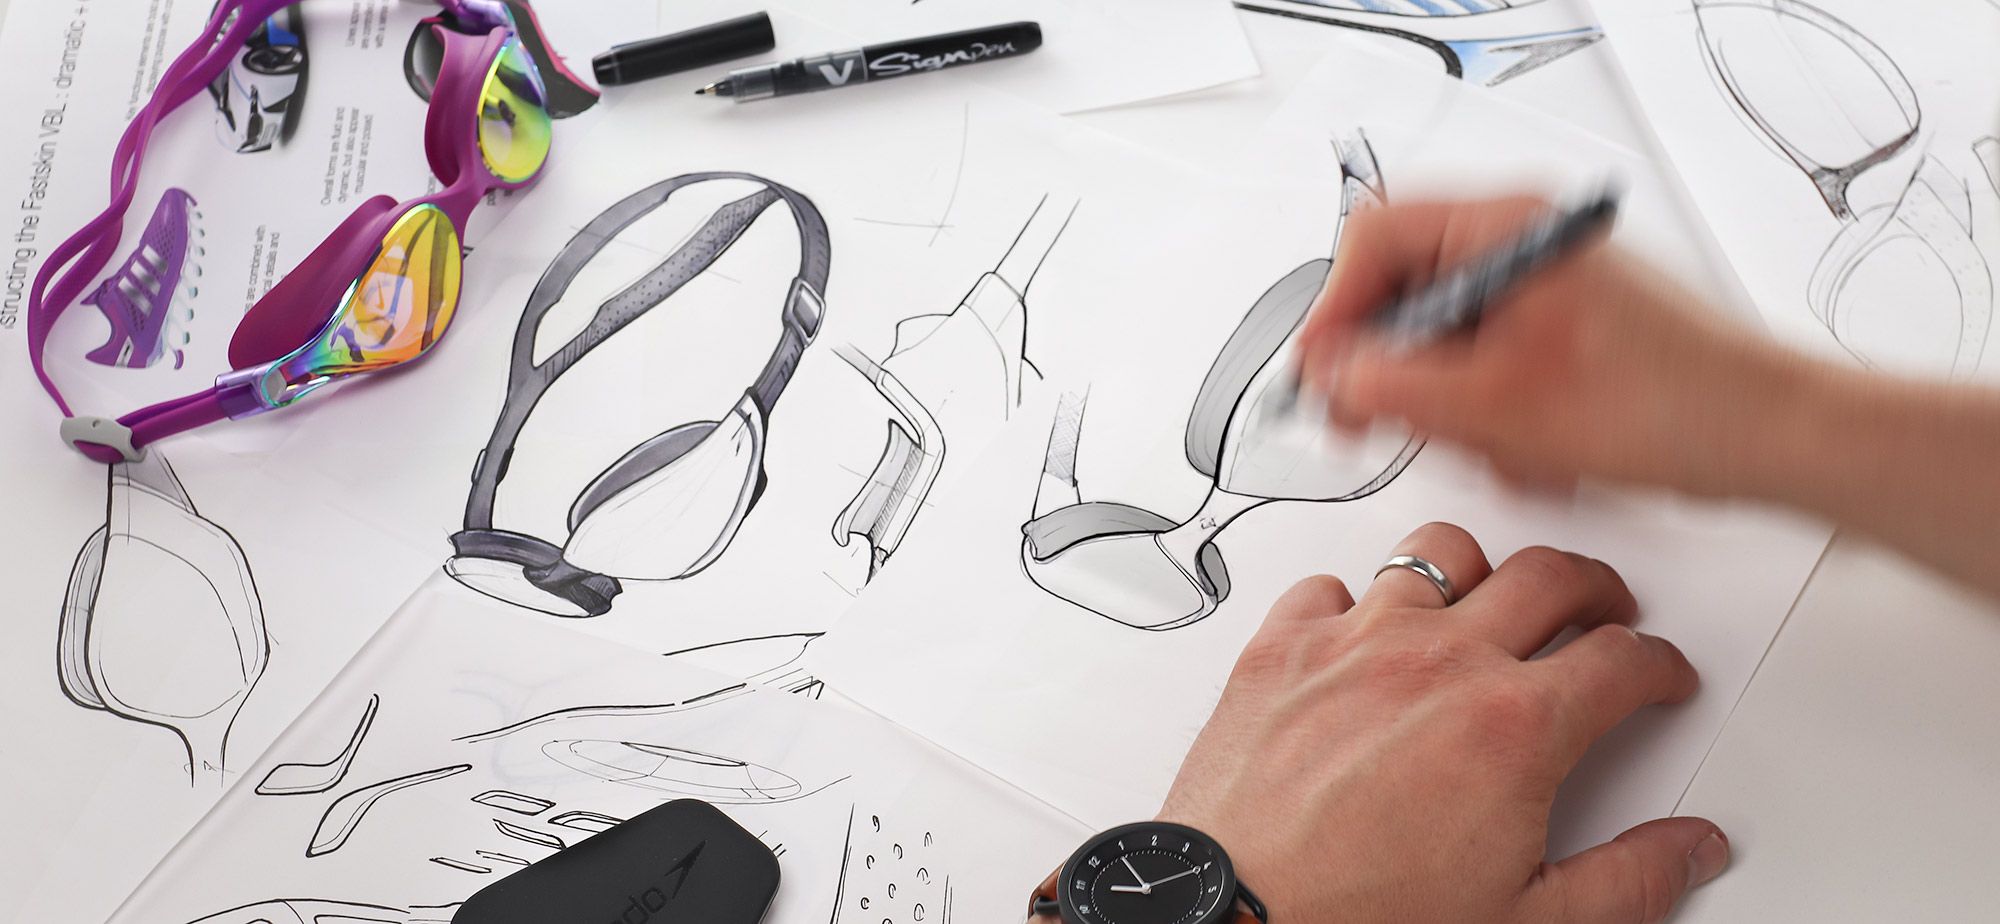 Master the Art of Product Design with These Expert Tips